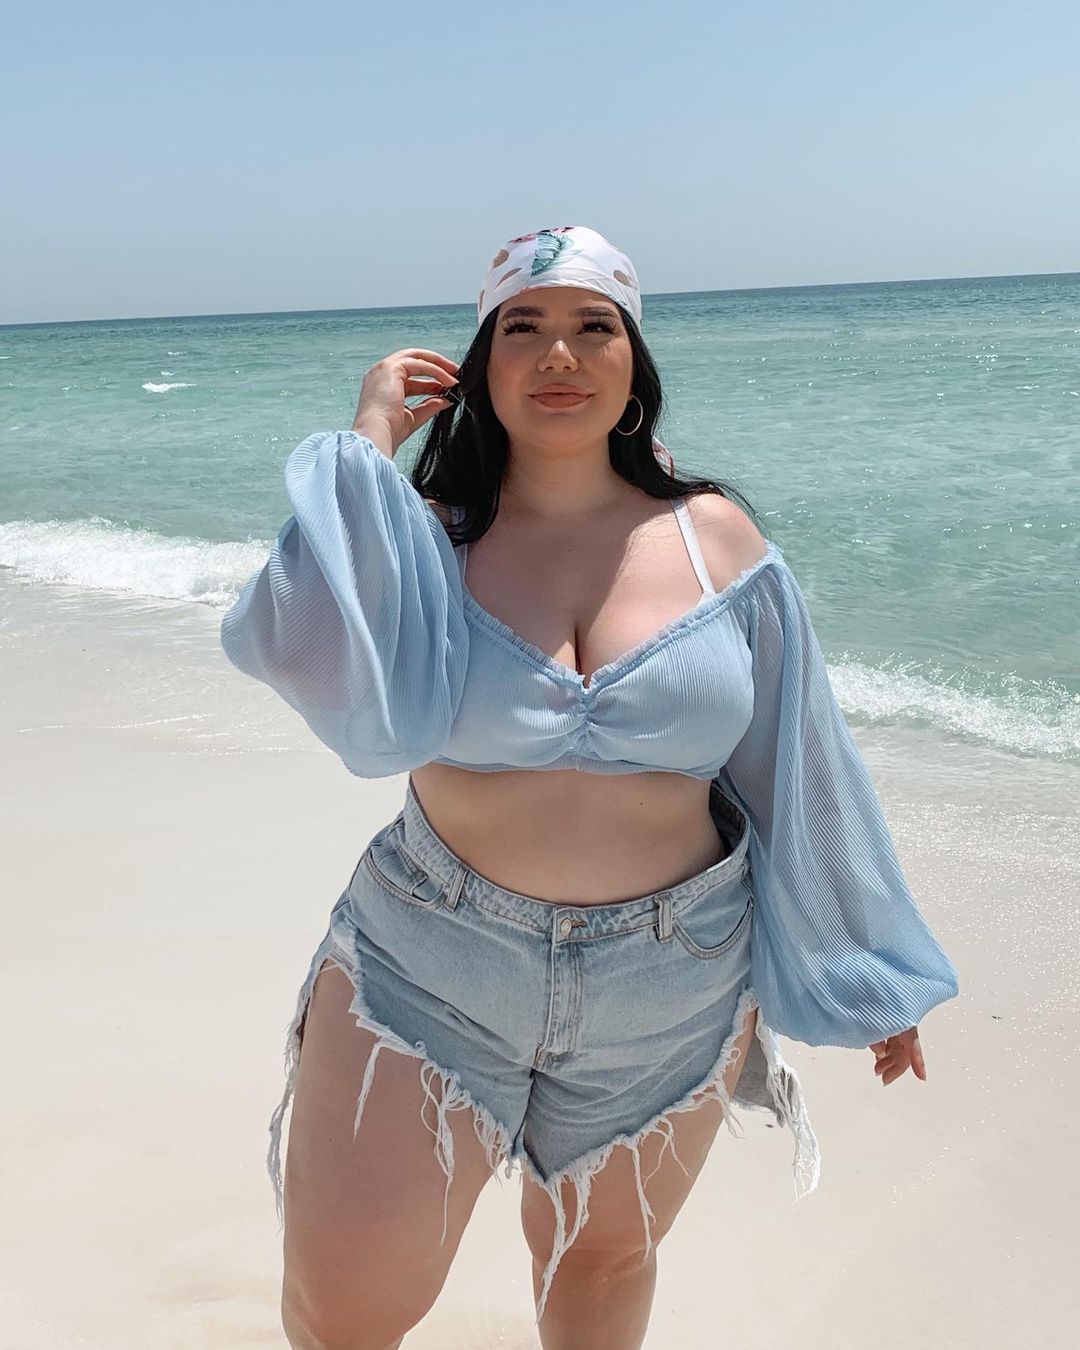 26 Plus Size Shorts Outfits and Styling Tips